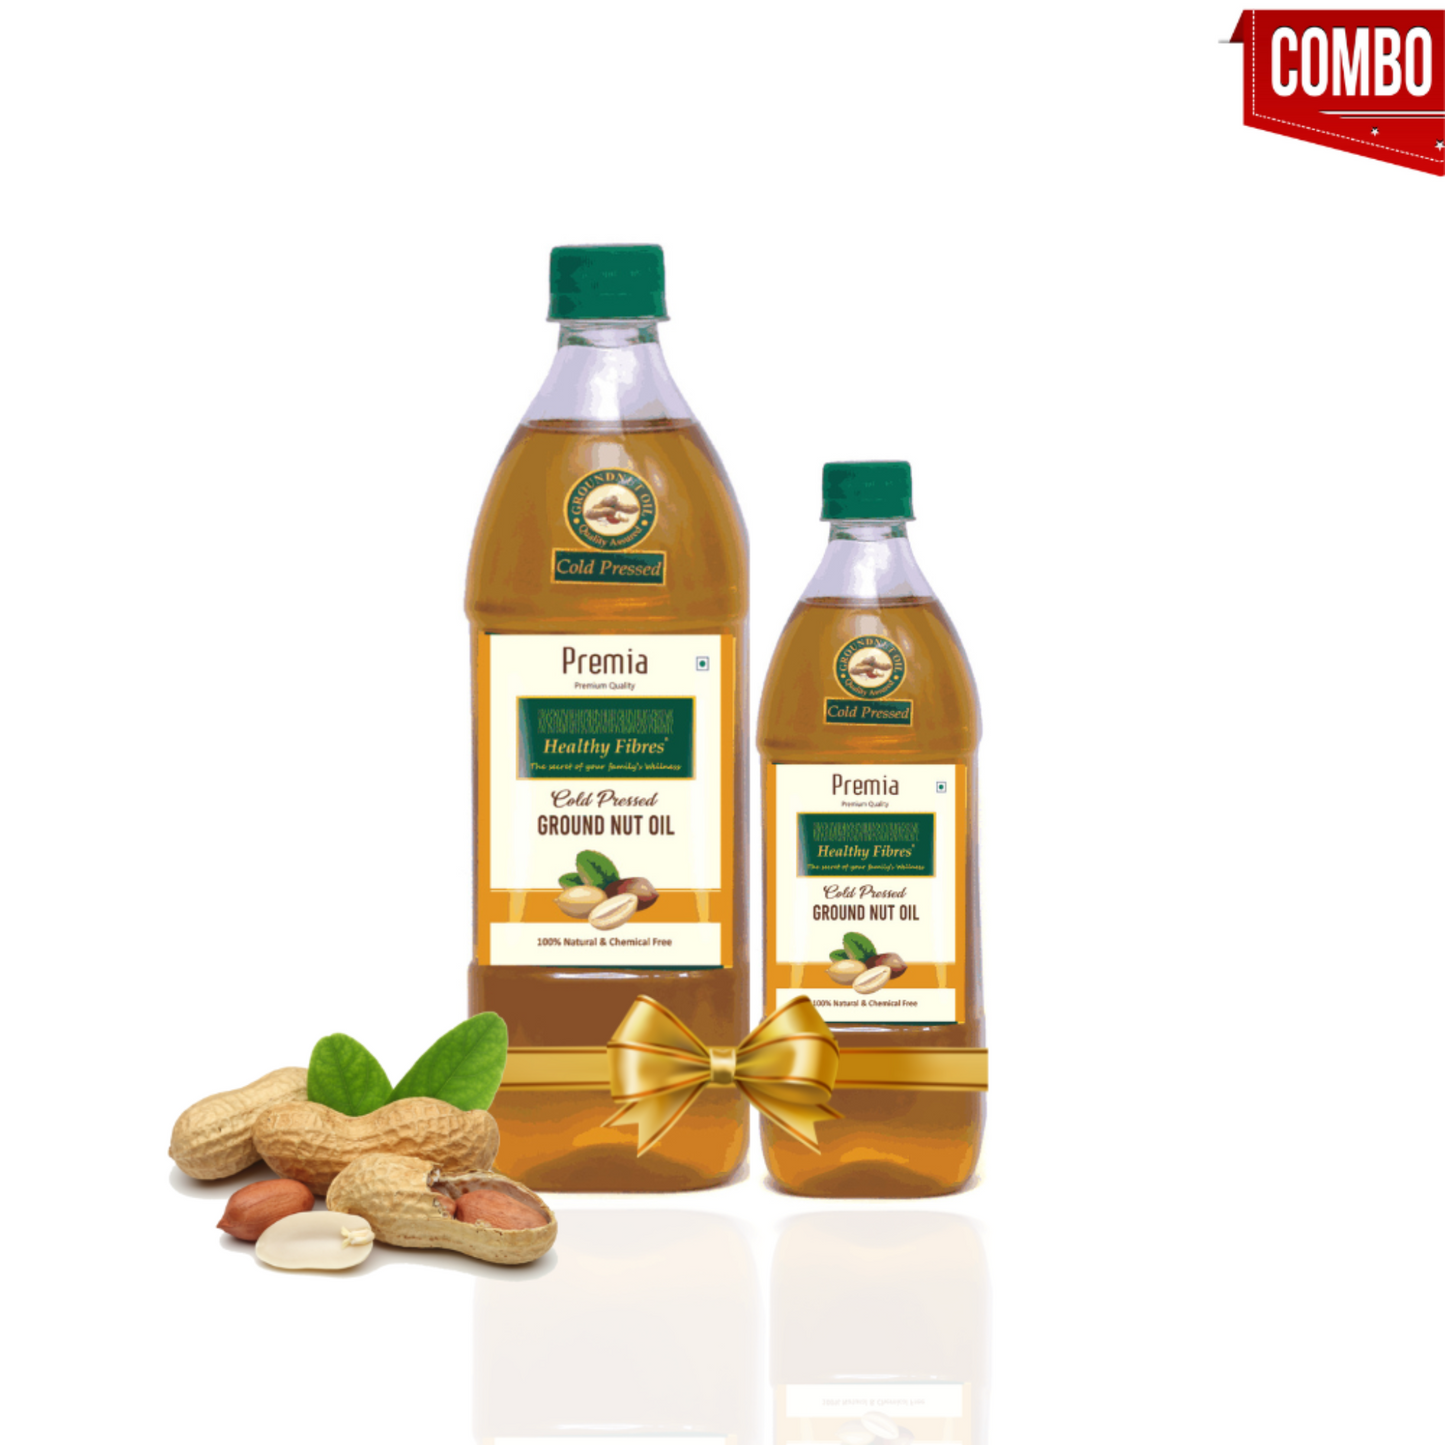 
                  
                    Healthy Fibres Groundnut Oil Combo
                  
                